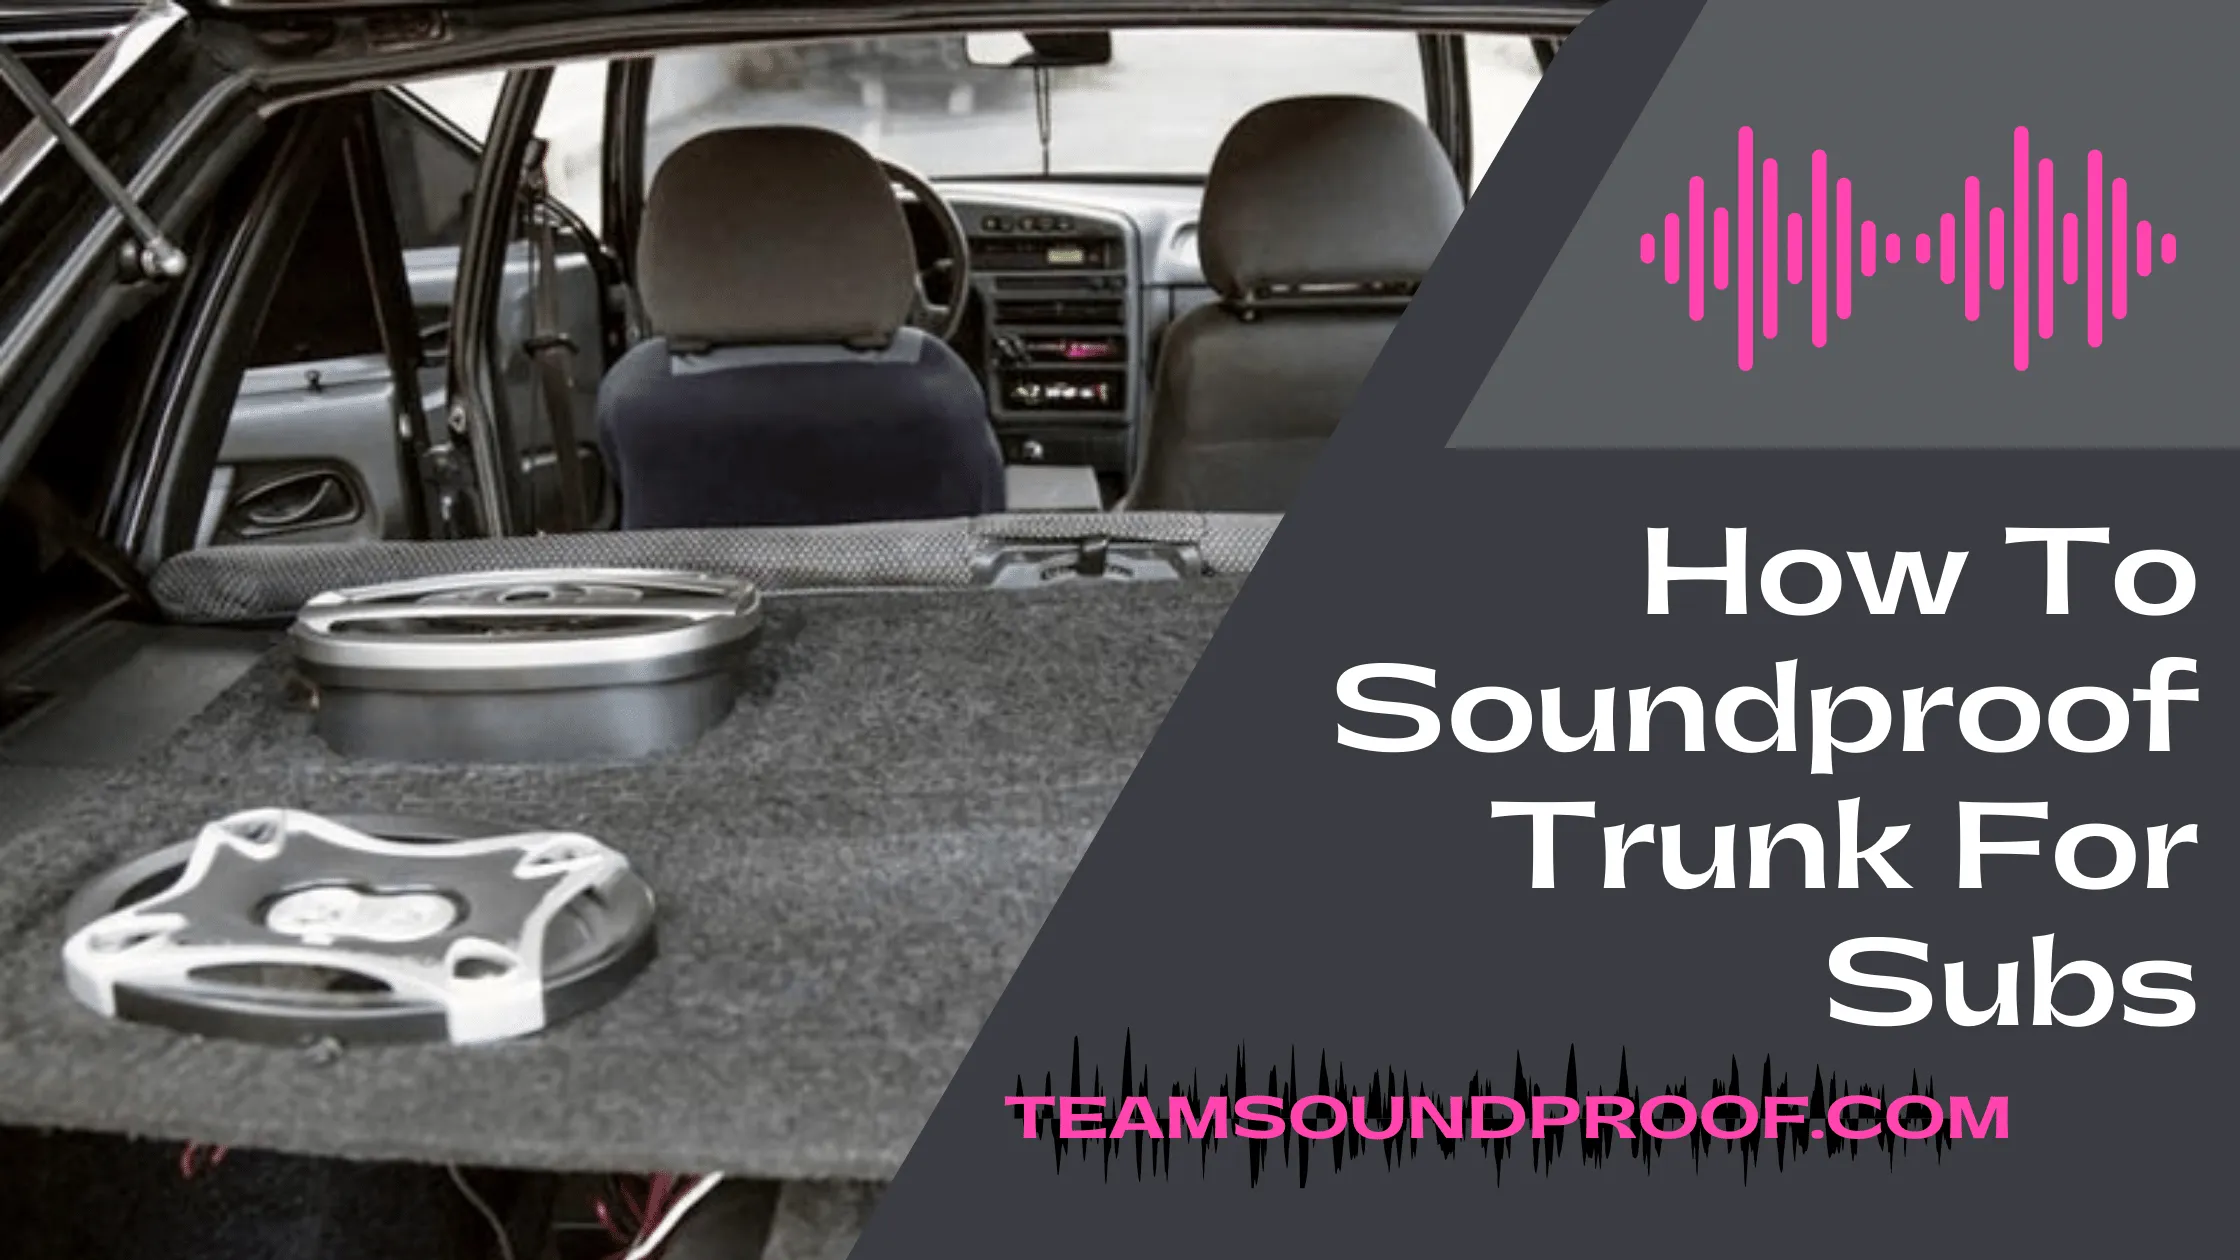 How To Soundproof Trunk For Subs - Comprehensive Guide